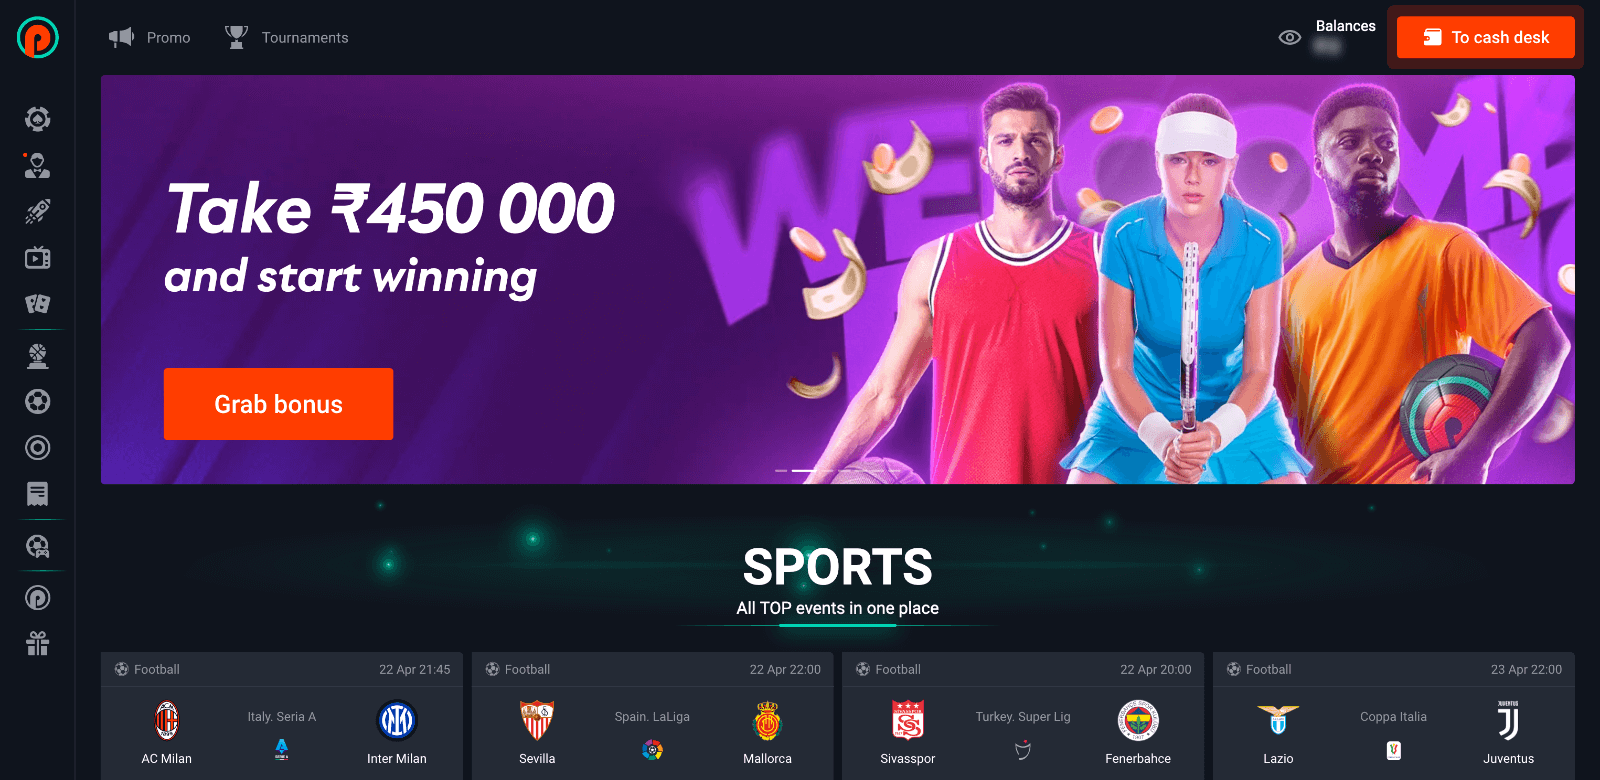 Pin Up offers its new users from India a generous welcome bonus for sports betting